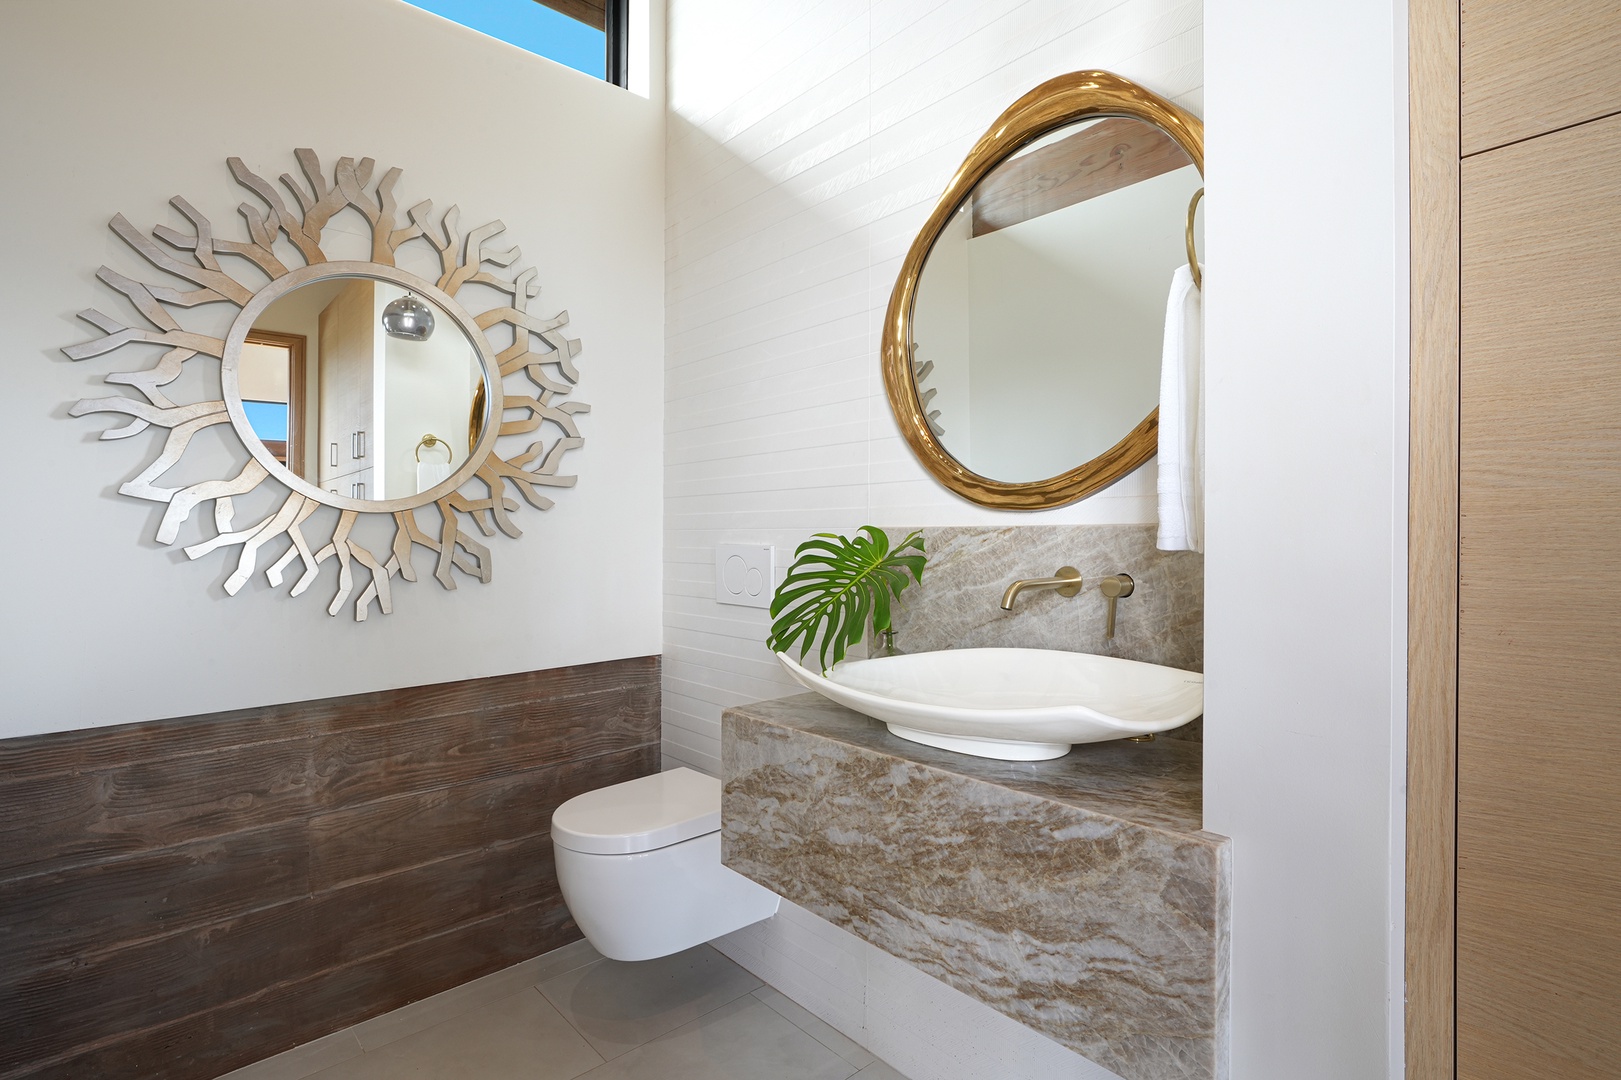 Koloa Vacation Rentals, Hale Keaka at Kukui'ula - Powder room elegance defined by a striking sunburst mirror and marble accents, creating a stylish space for refreshment and refinement.